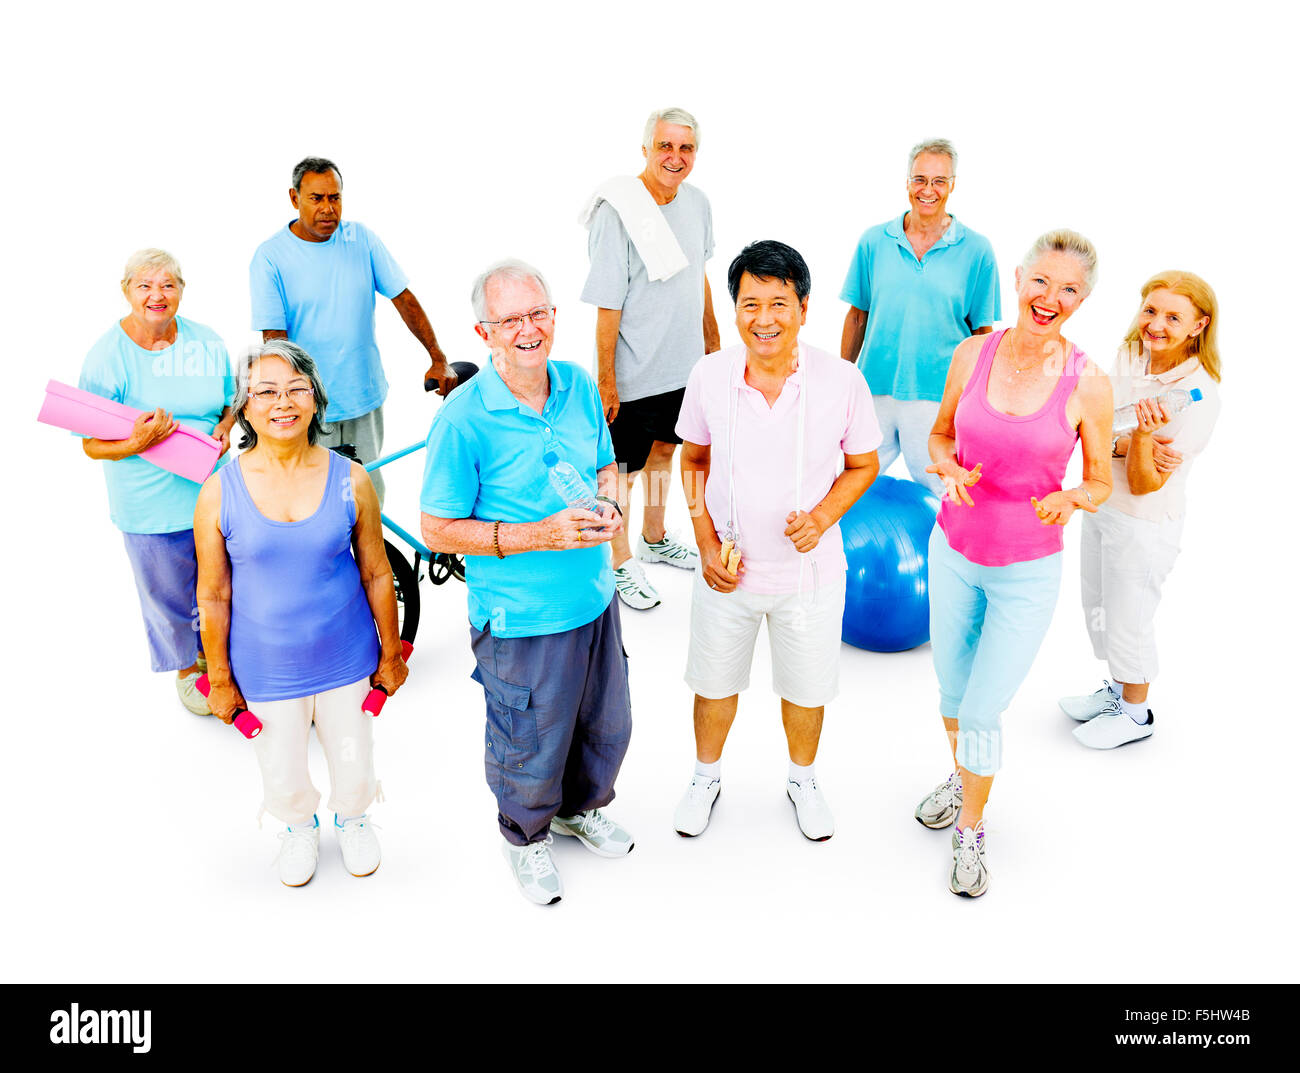 Senior Adult Exercise Activity Healthy Workout Concept Stock Photo